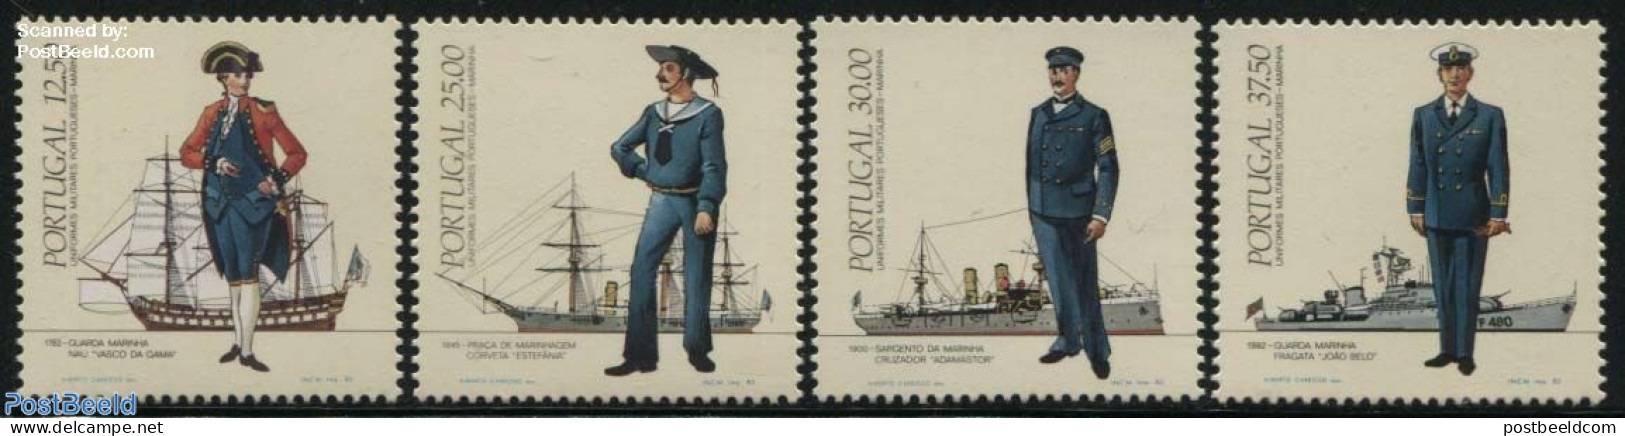 Portugal 1983 Uniforms & Ships 4v, Mint NH, Transport - Various - Ships And Boats - Uniforms - Unused Stamps